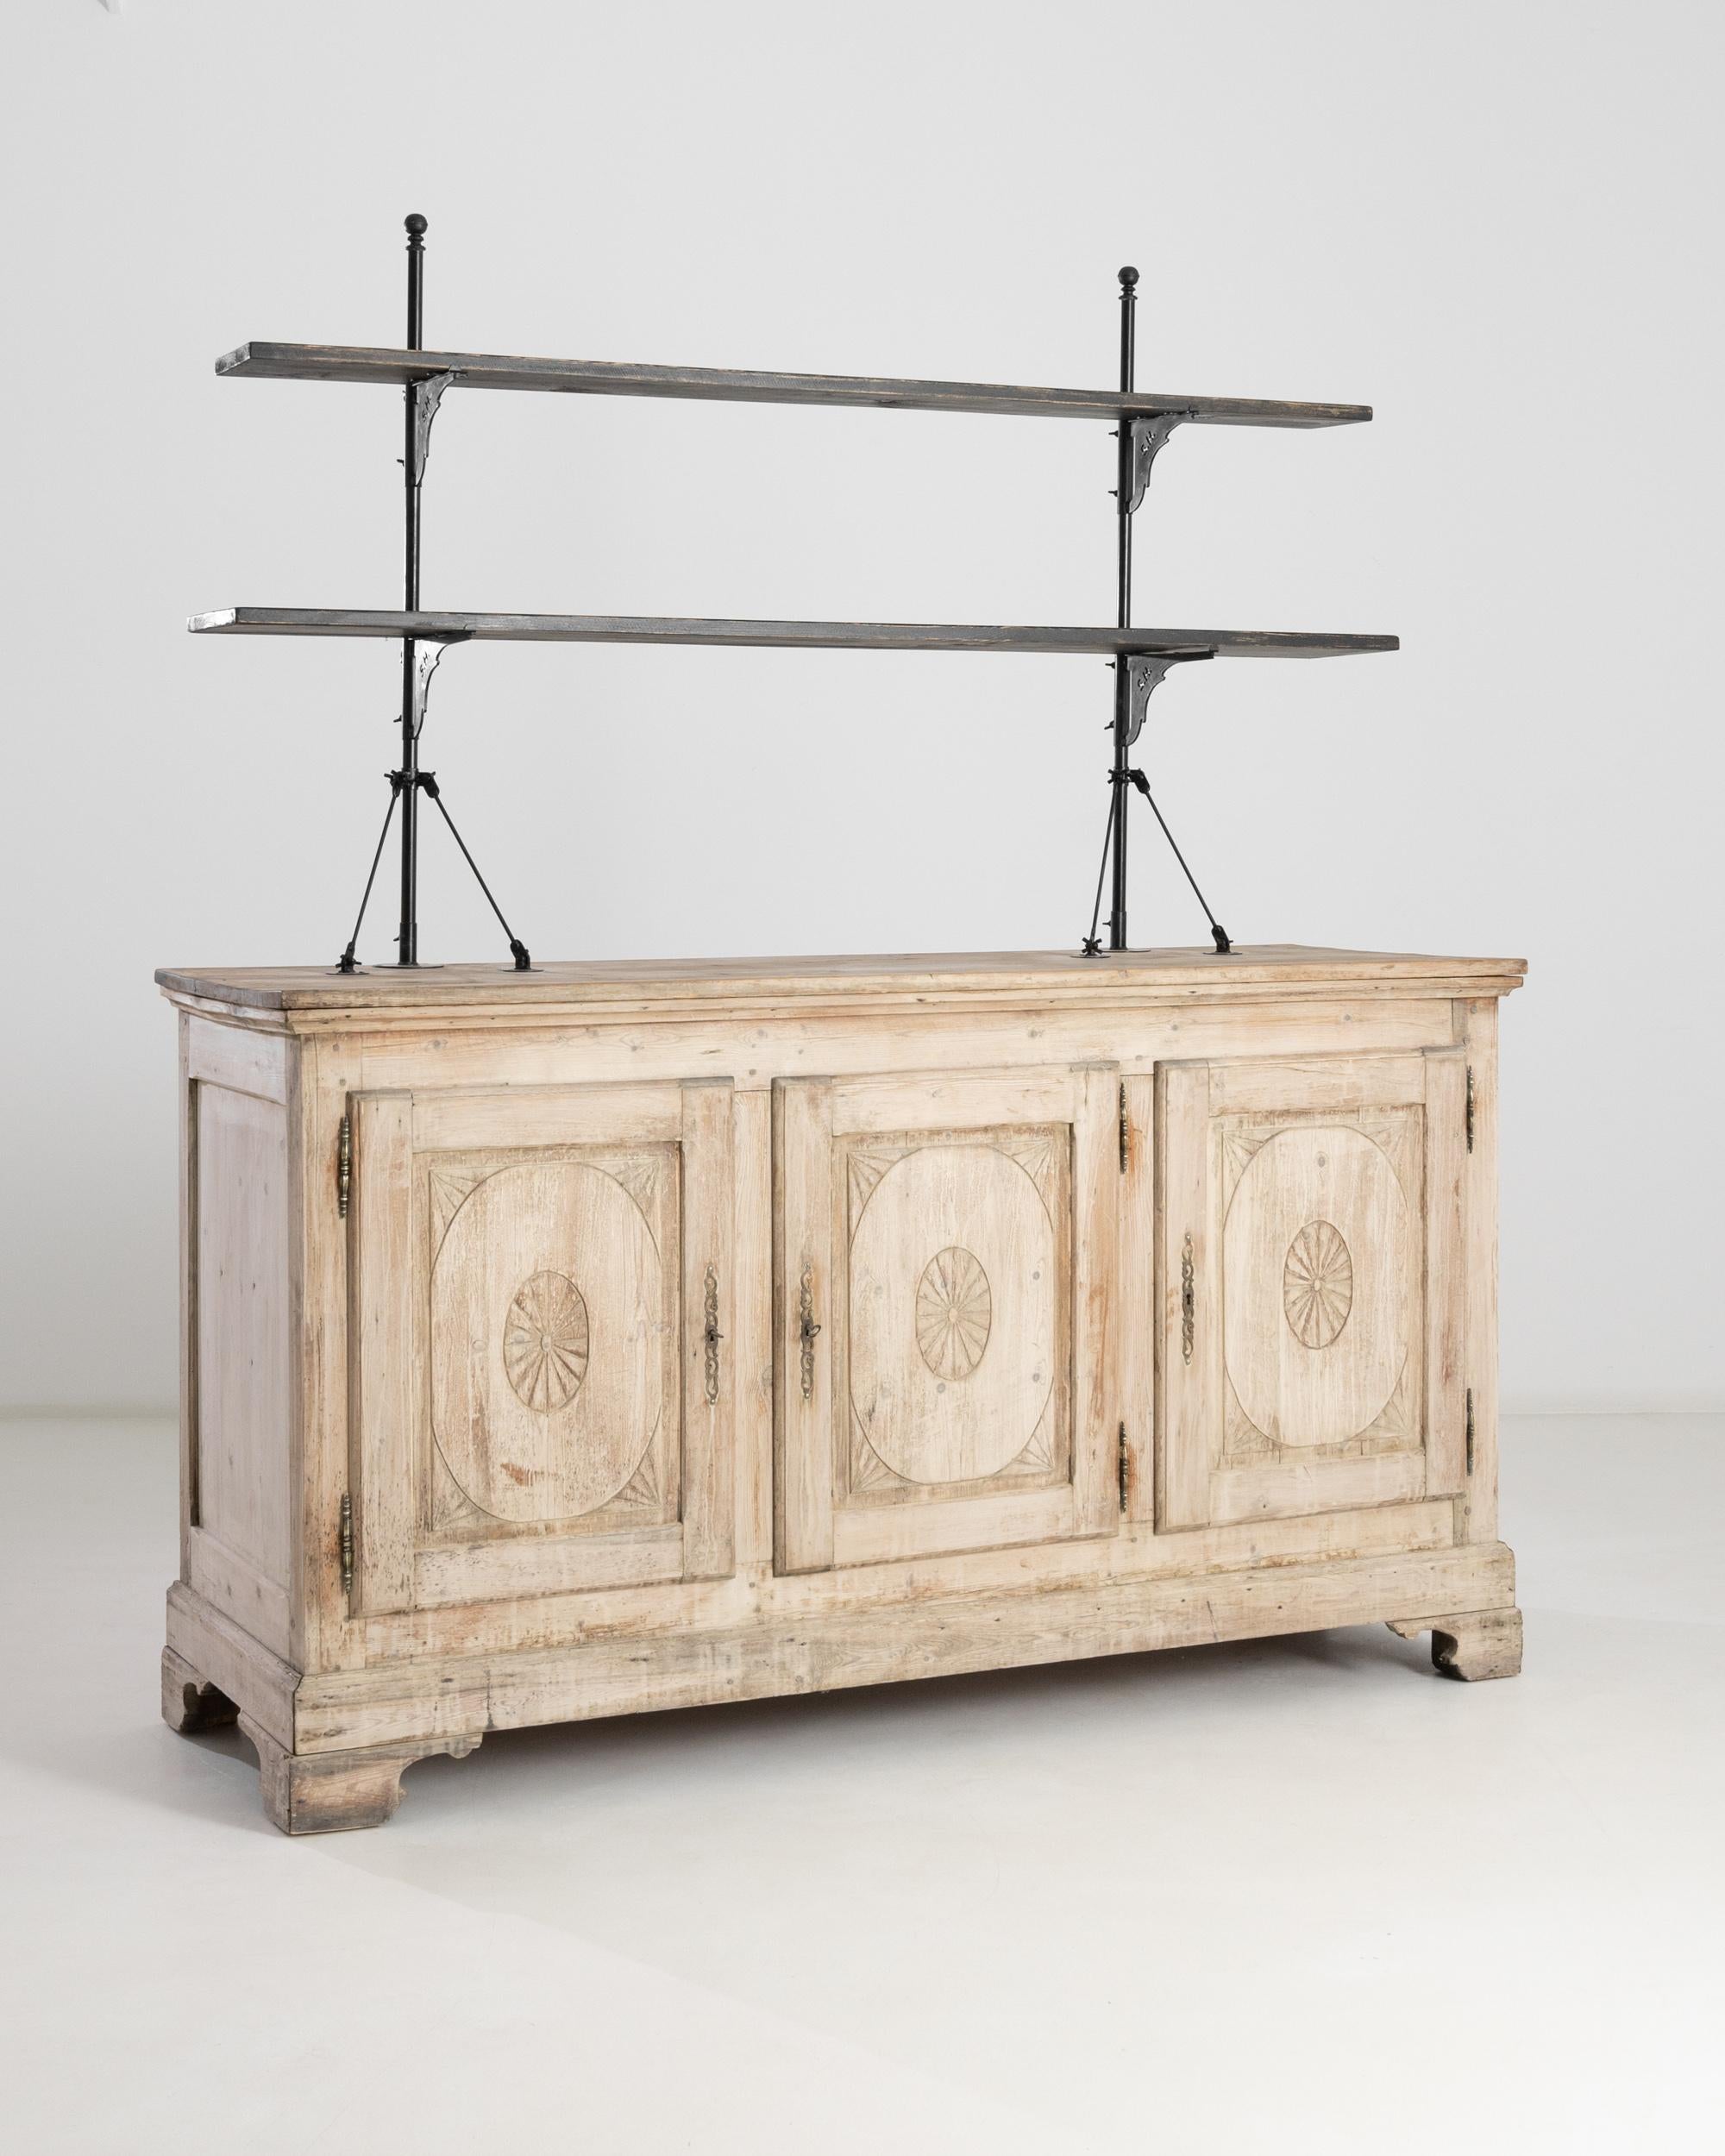 This antique display cabinet harks back to an era of exploration and discovery. Made in Belle Époque France, circa 1880, the sandy natural oak of the lower cabinet evokes uncharted beaches, while the stark, minimalist profile of the upper shelves